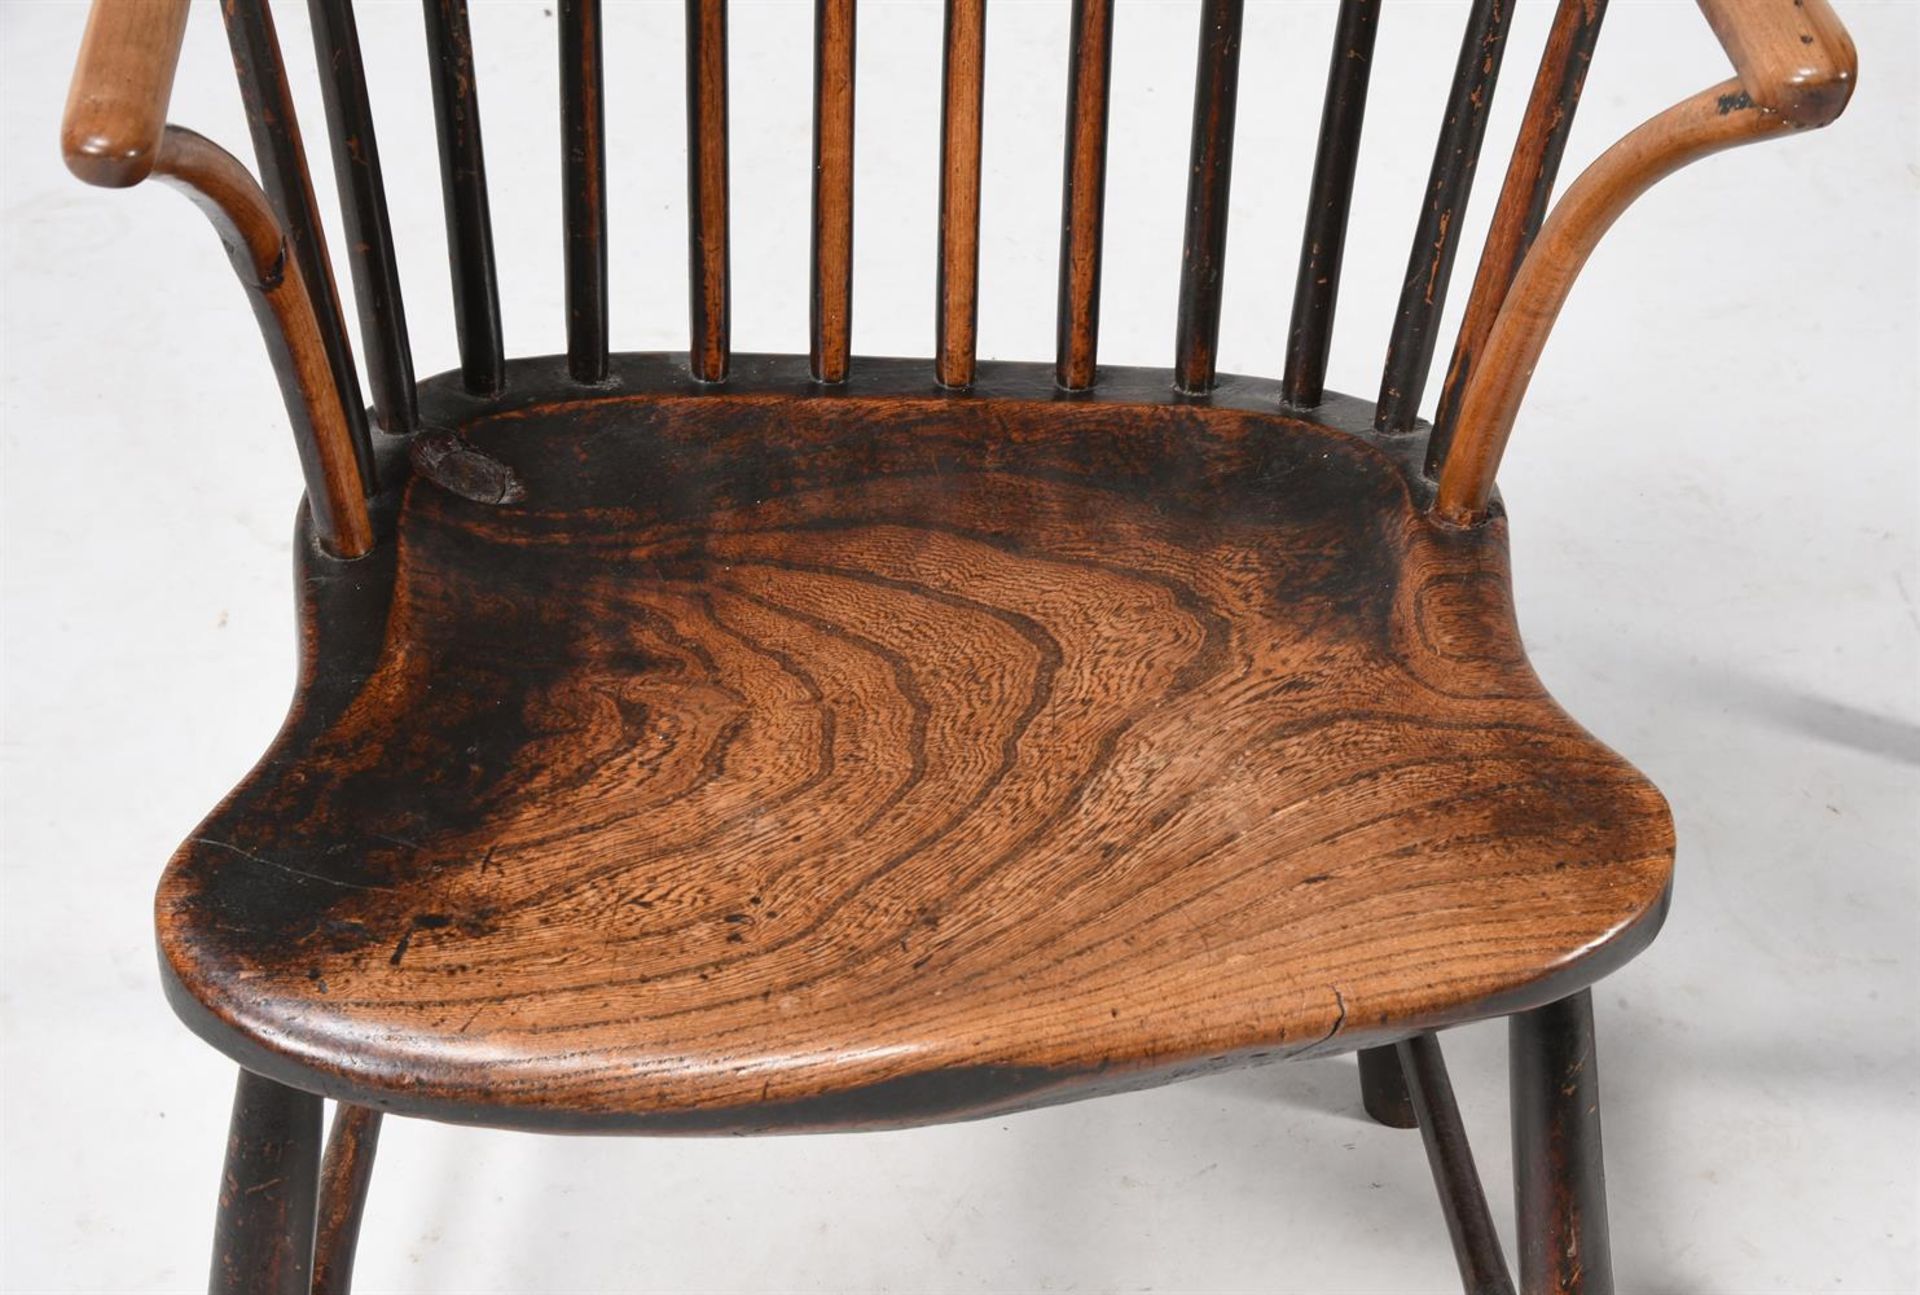 A PAIR OF FRUITWOOD, ASH AND ELM WINDSOR ARMCHAIRS, LATE 18TH/EARLY 19TH CENTURY - Image 6 of 6